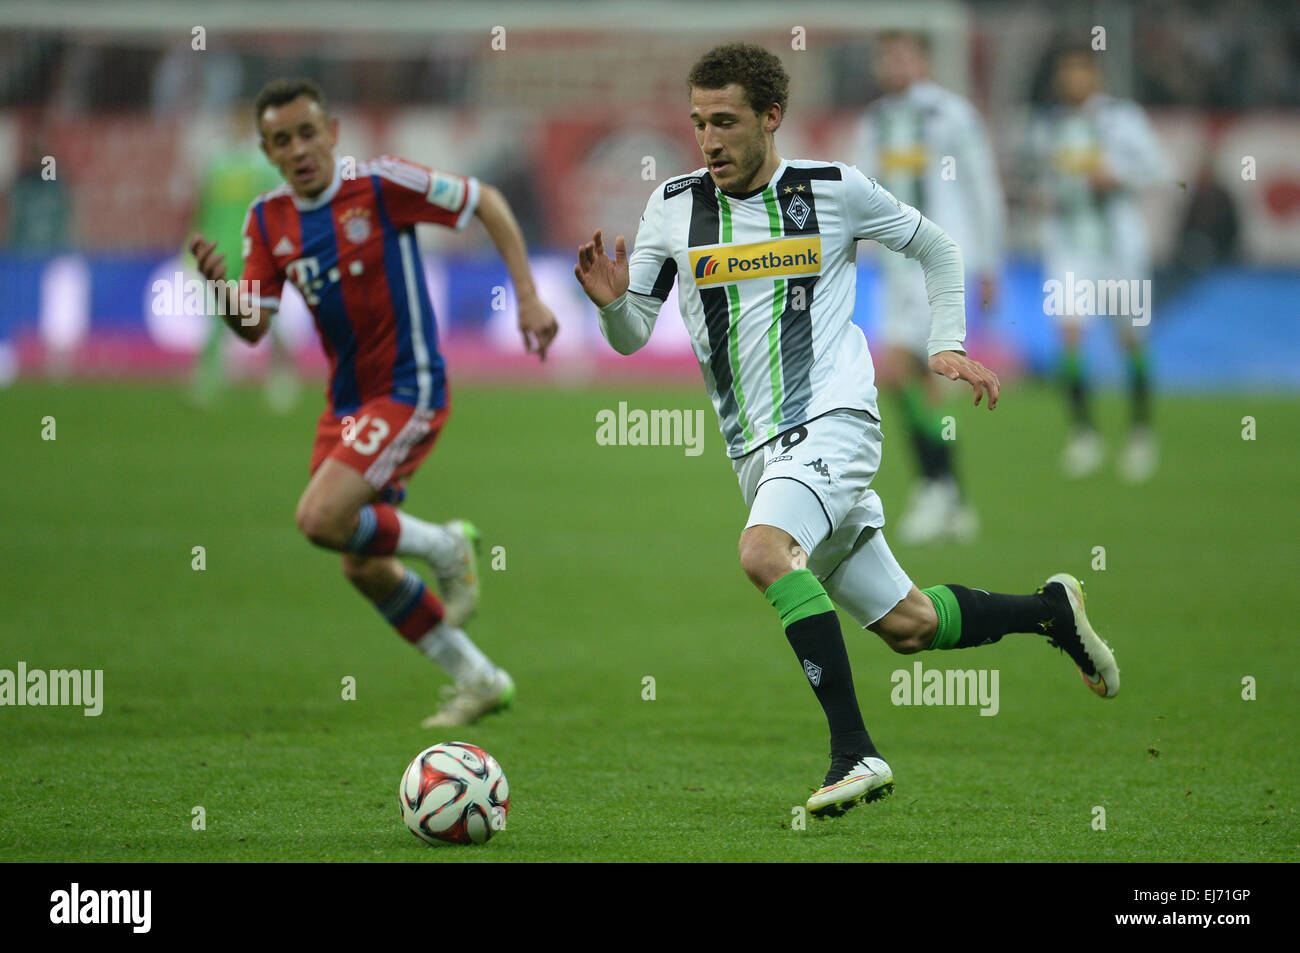 Munich, Germany. 22nd Mar, 2015. Munich's Rafinha (L) vies for the ball with Gladbach's Fabian Johnson during the German Bundesliga soccer match between FC Bayern Munich and Borussia Moenchengladbach in the Allianz Arena in Munich, Germany, 22 March 2015. Photo: ANDREAS GEBERT/dpa/Alamy Live News Stock Photo